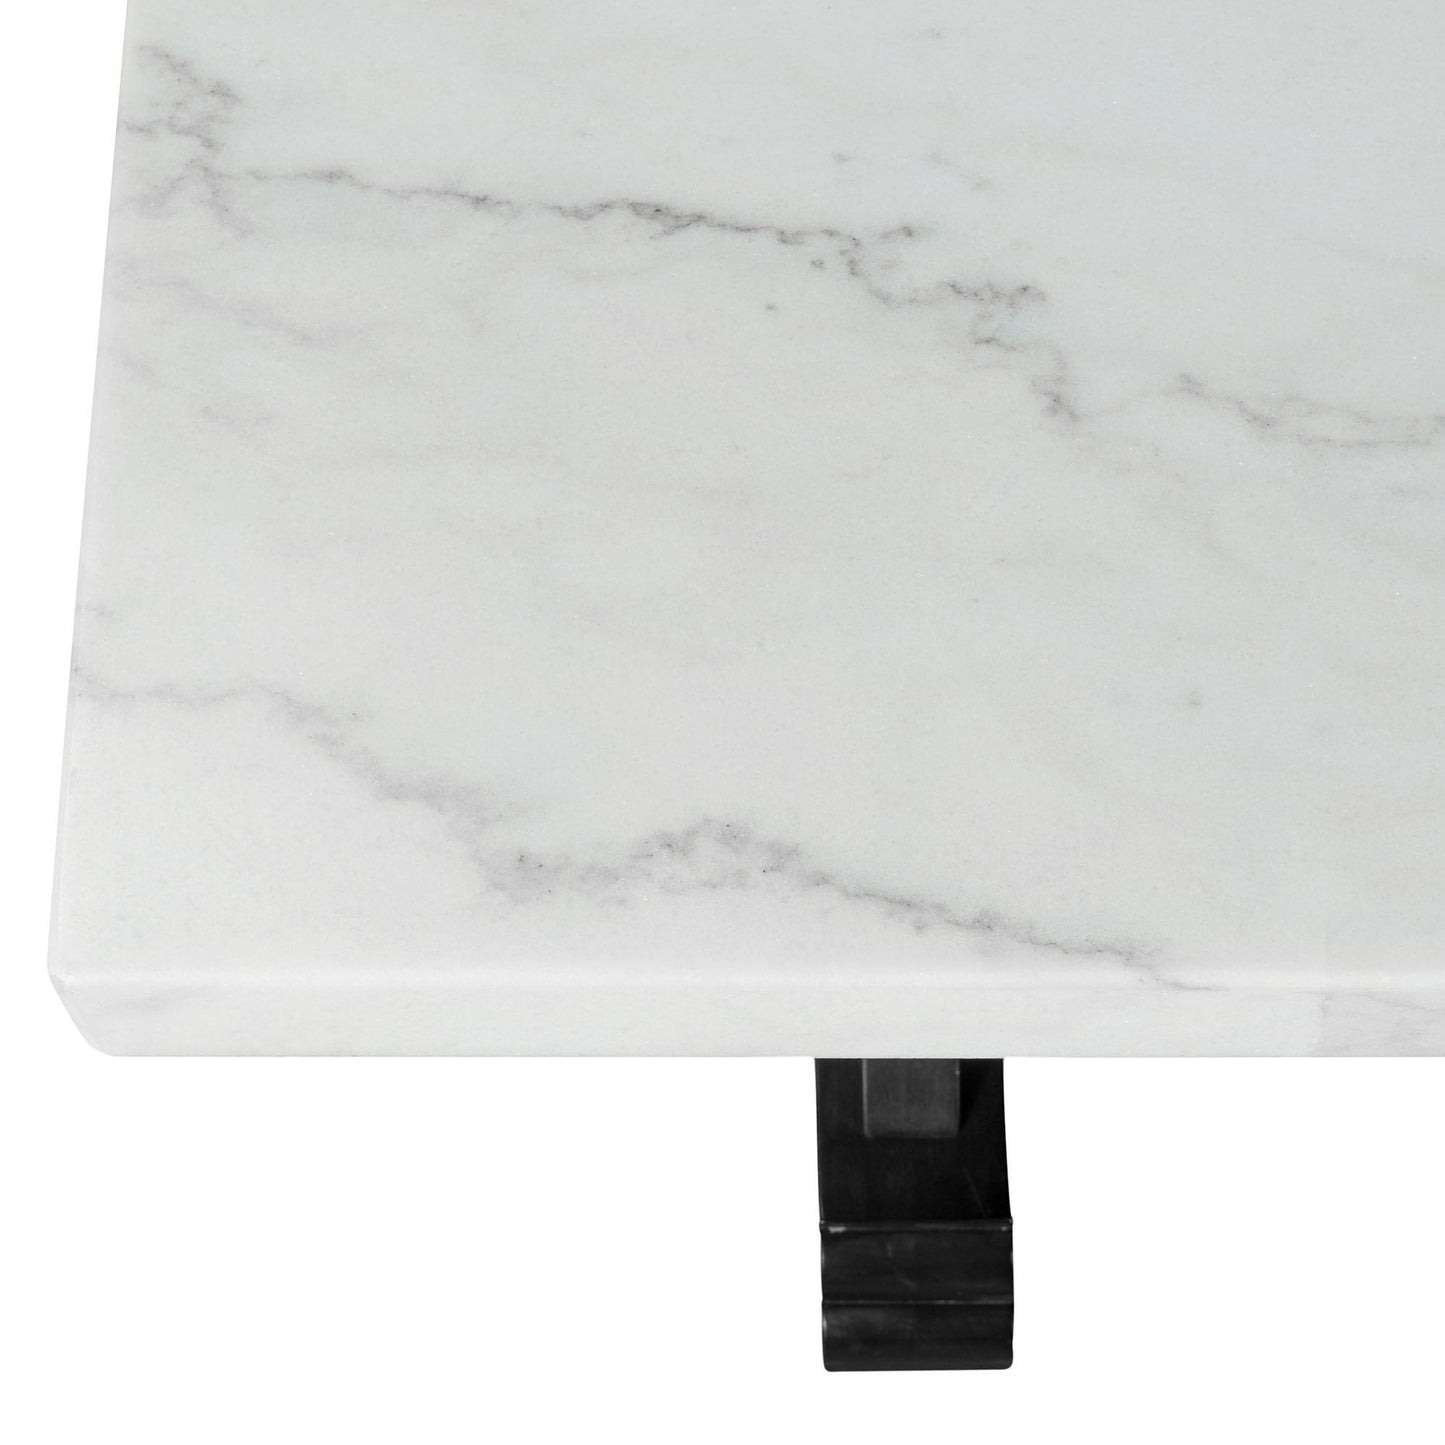 Tuscany - Marble Counter Height Dining Table